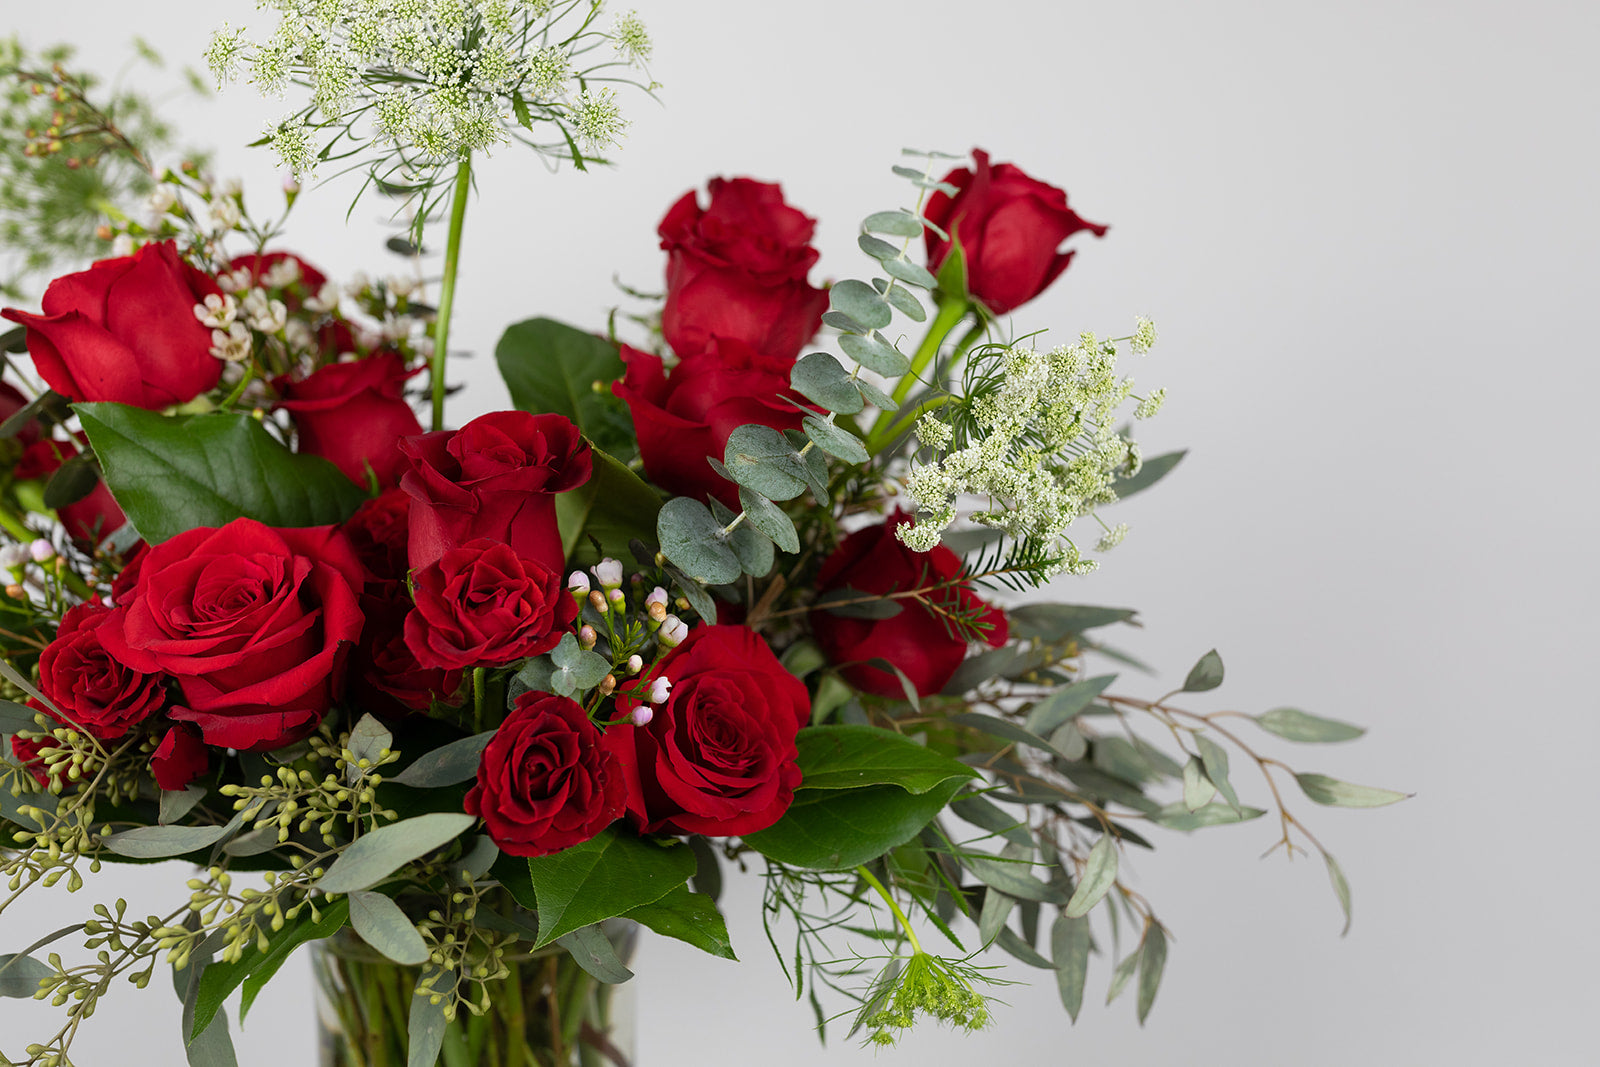 The lover is filled with extra-large red roses, red spray roses, queen anne's lace, and romantic eucalyptus greenery. Valentien's flower delivery available for same day delivery in the local Kansas City great metro area. Red rose arrangement for Valentine's Day. 